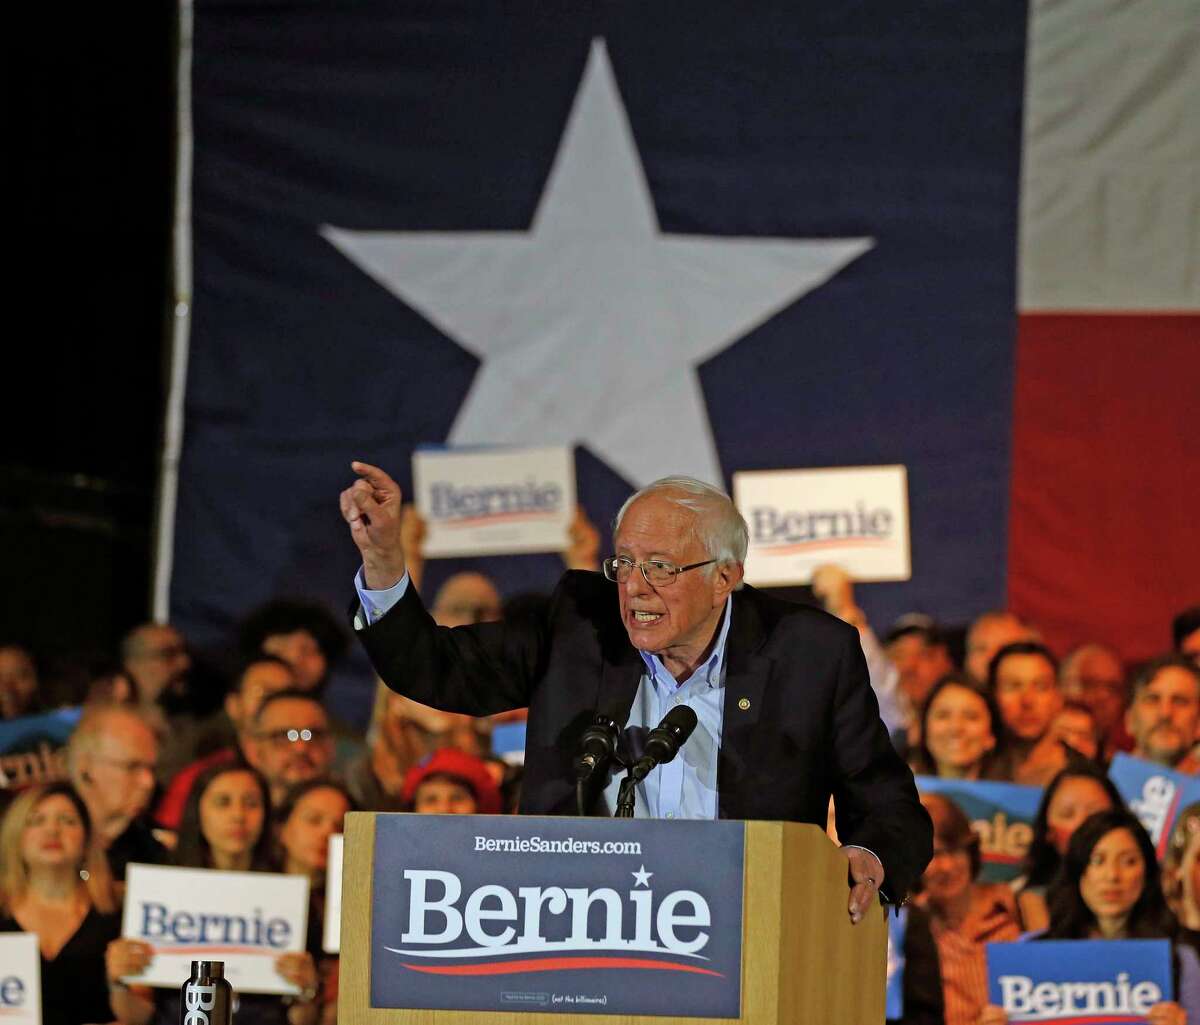 Bernie Sanders speaks to supporters at a campaign rally at the Cowboys Dance Hall on Saturday, February 22, 2020.